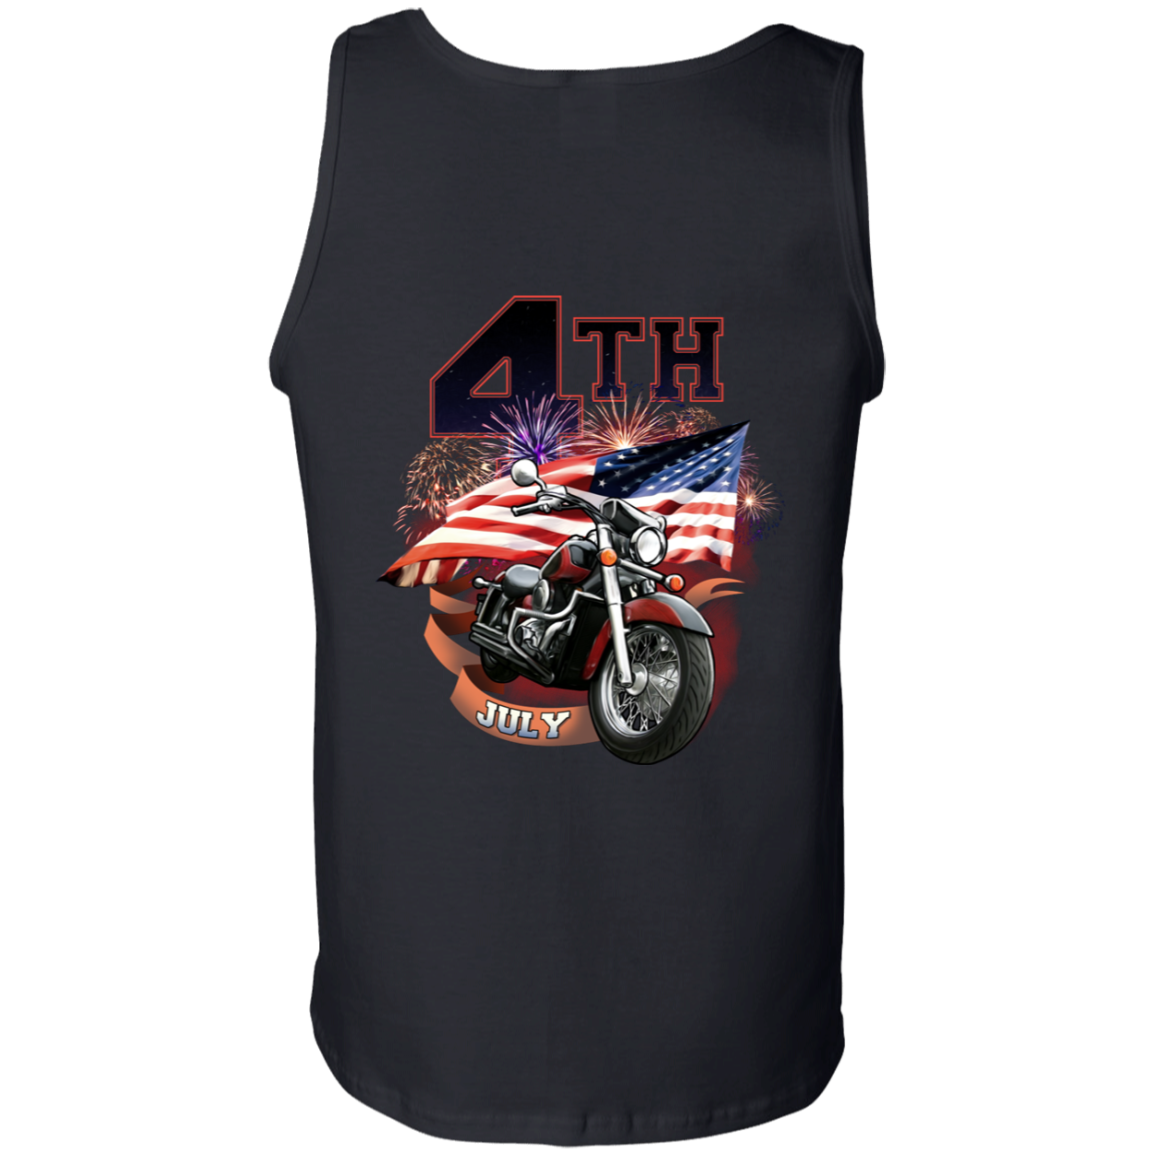 4th of July Tank Top, Cotton, Black - American Legend Rider